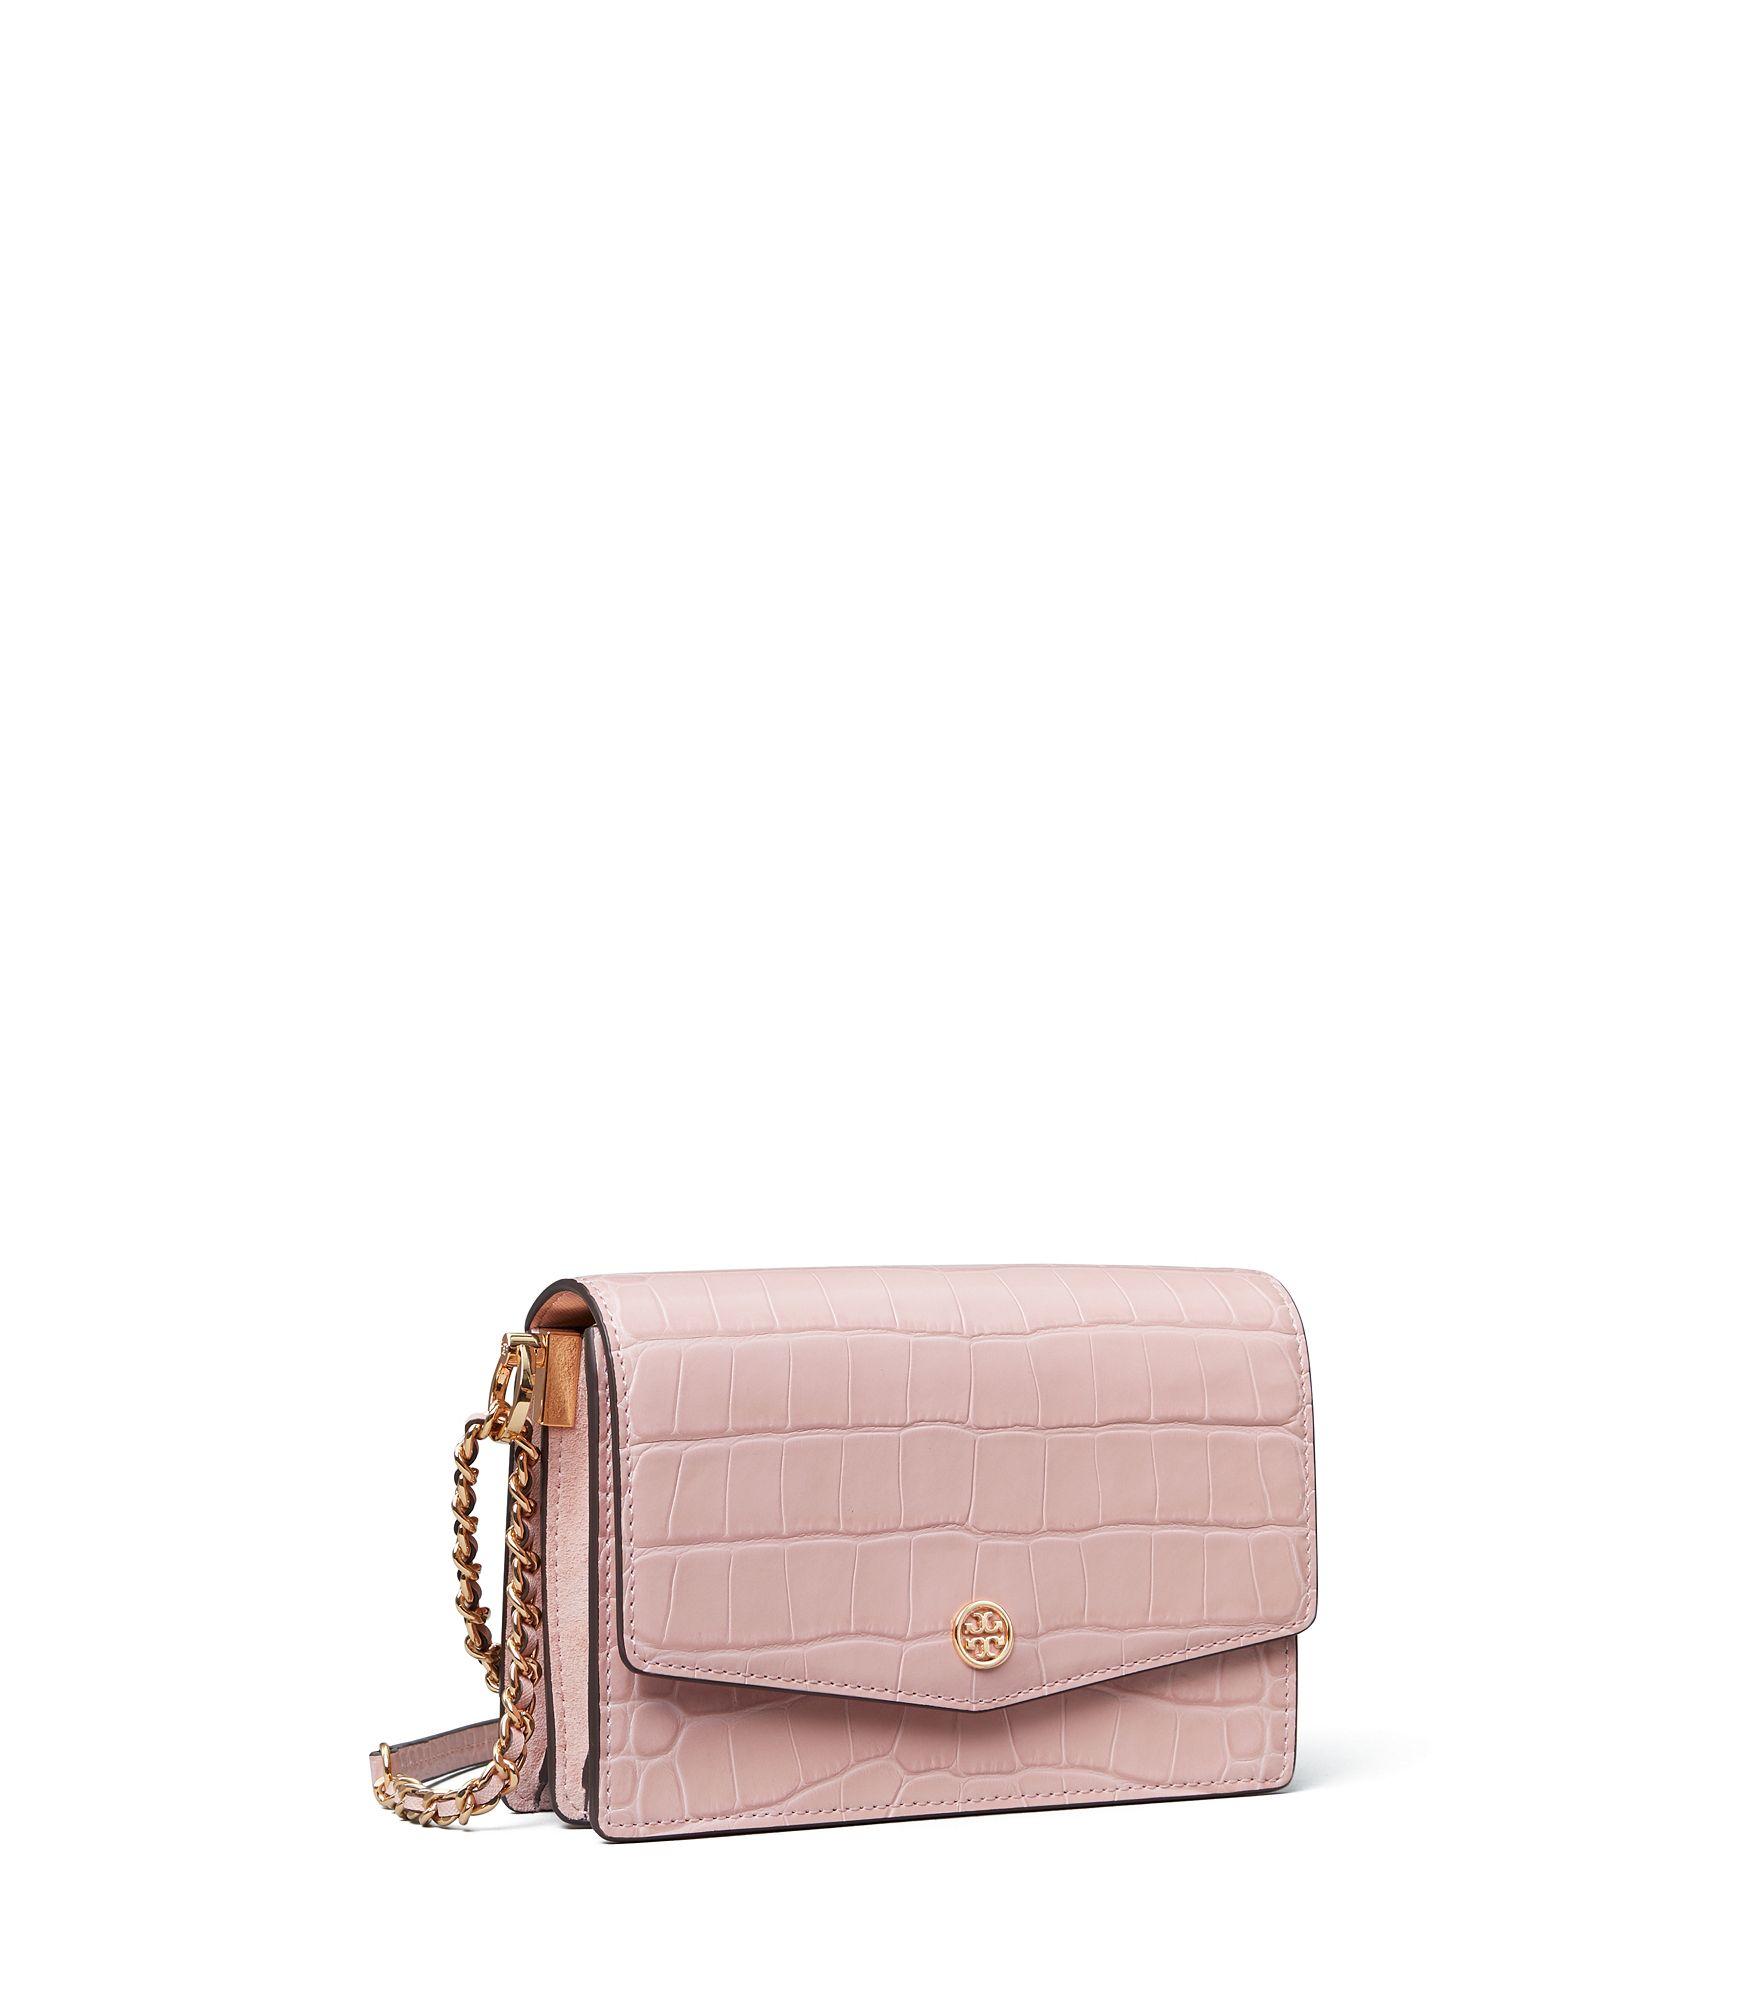 Tory Burch Clay Pink Juliette Croc-Embossed Patent Leather